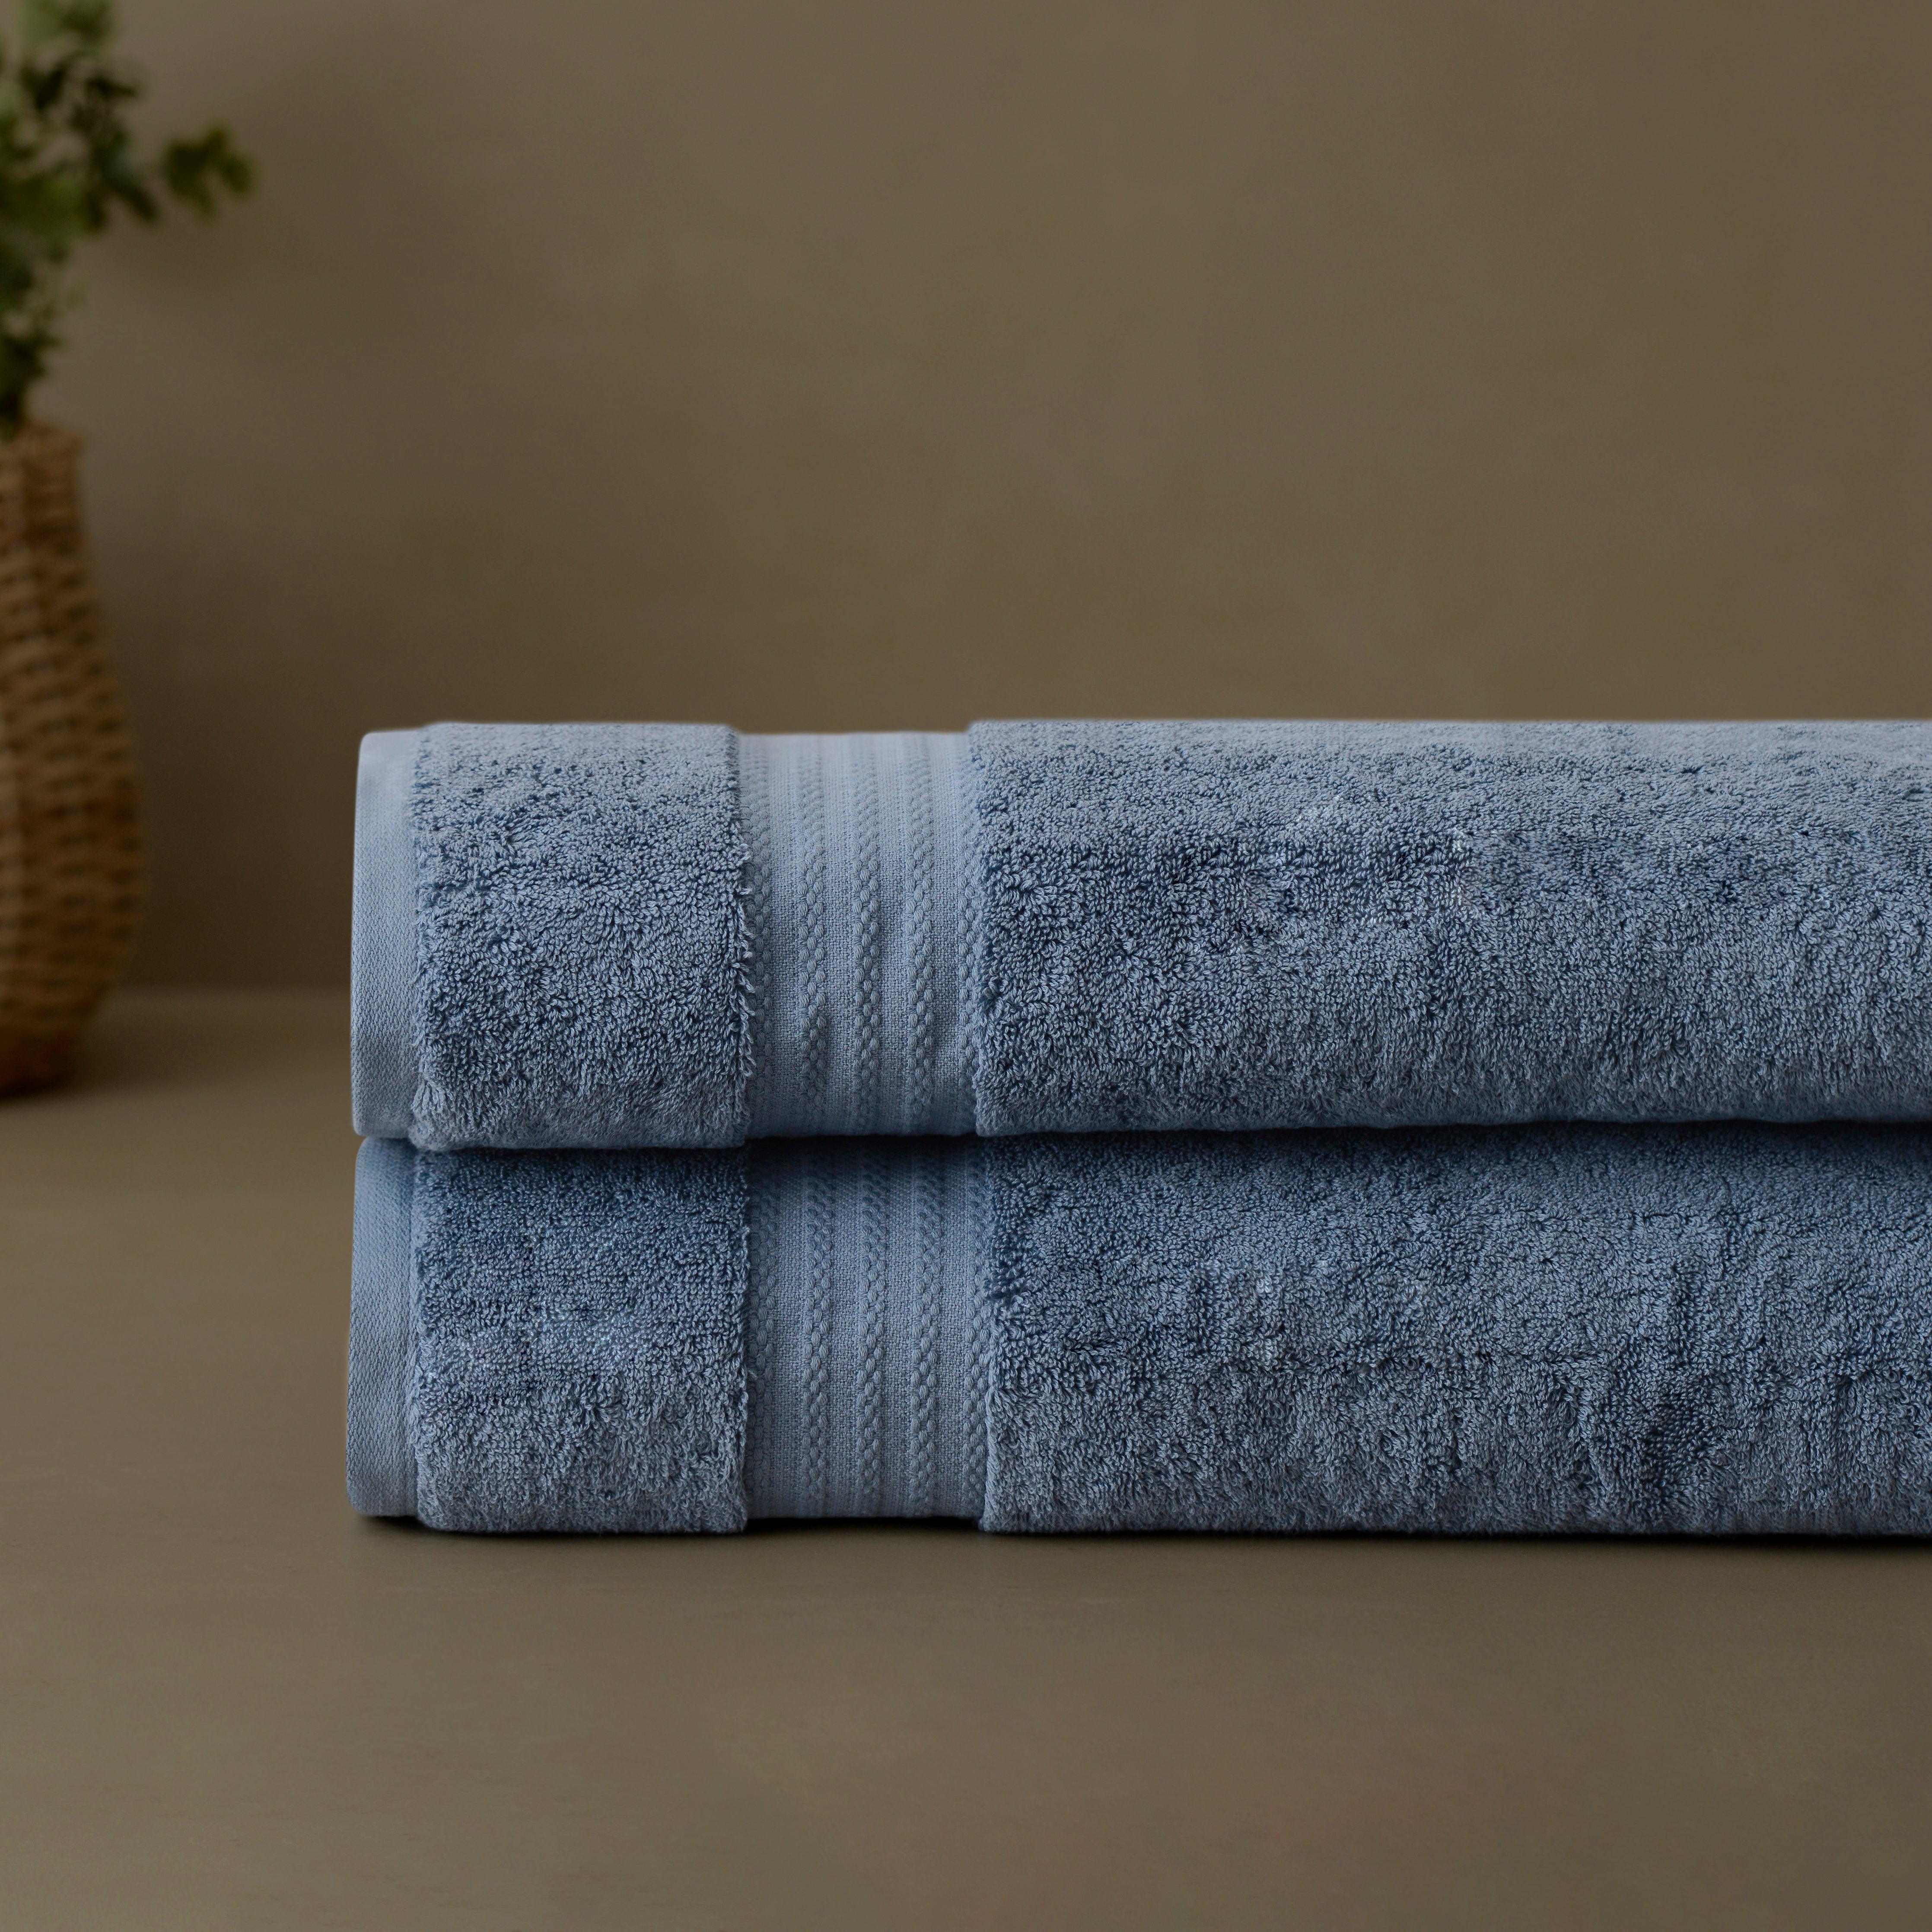 Bath Towels, Ethically Made Luxury Cotton